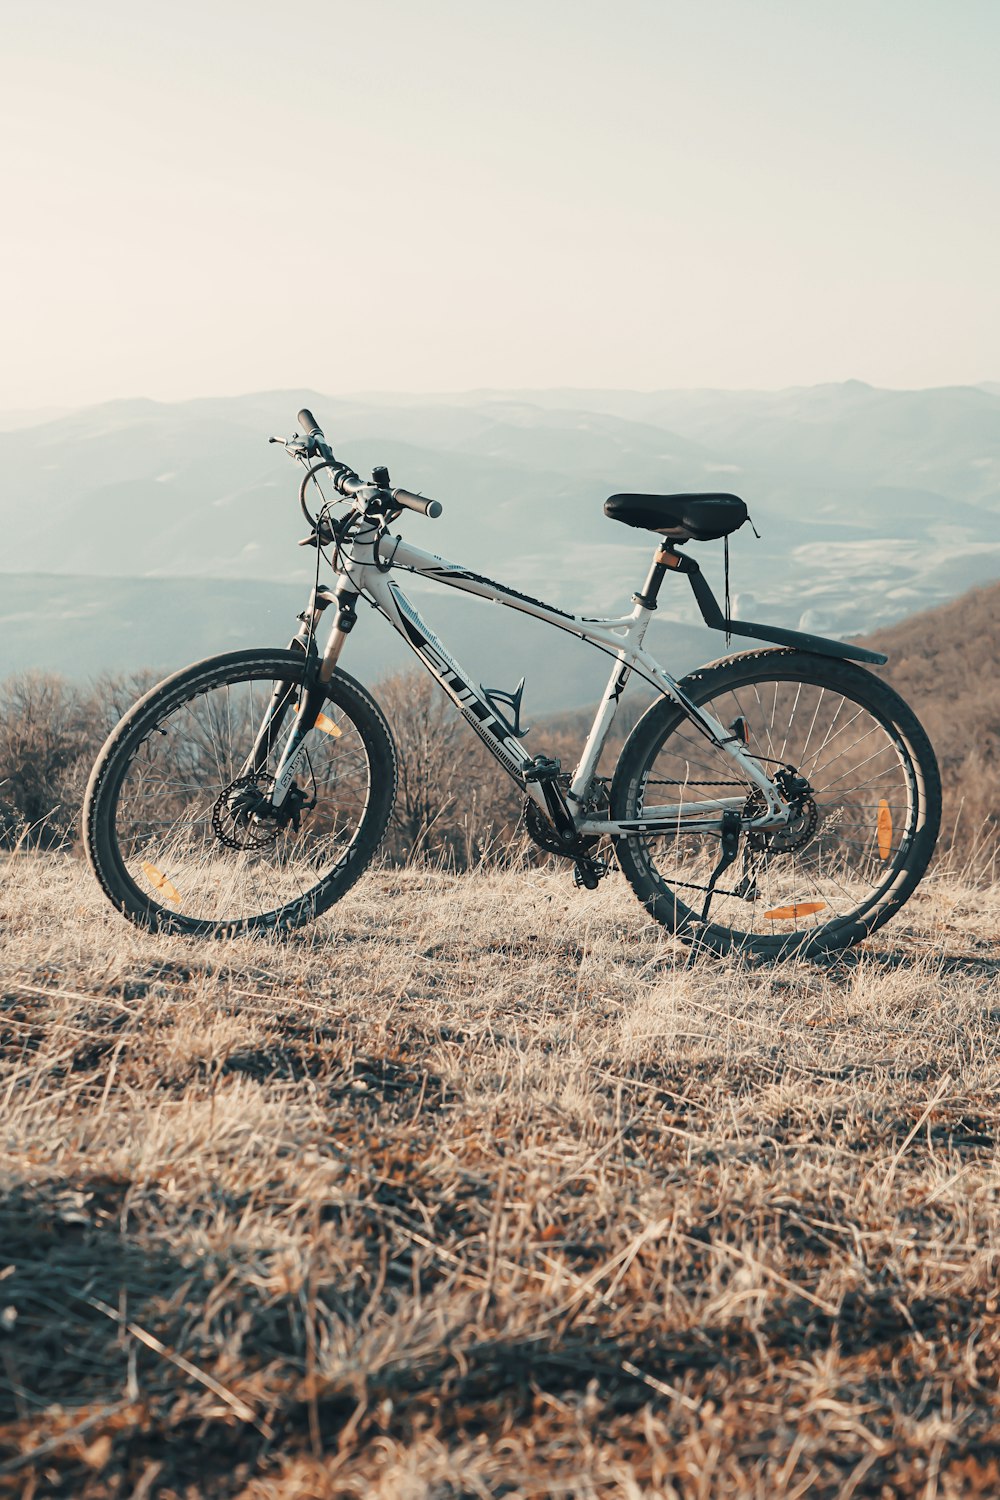 black and white hardtail mountain bike on brown grass field during daytime